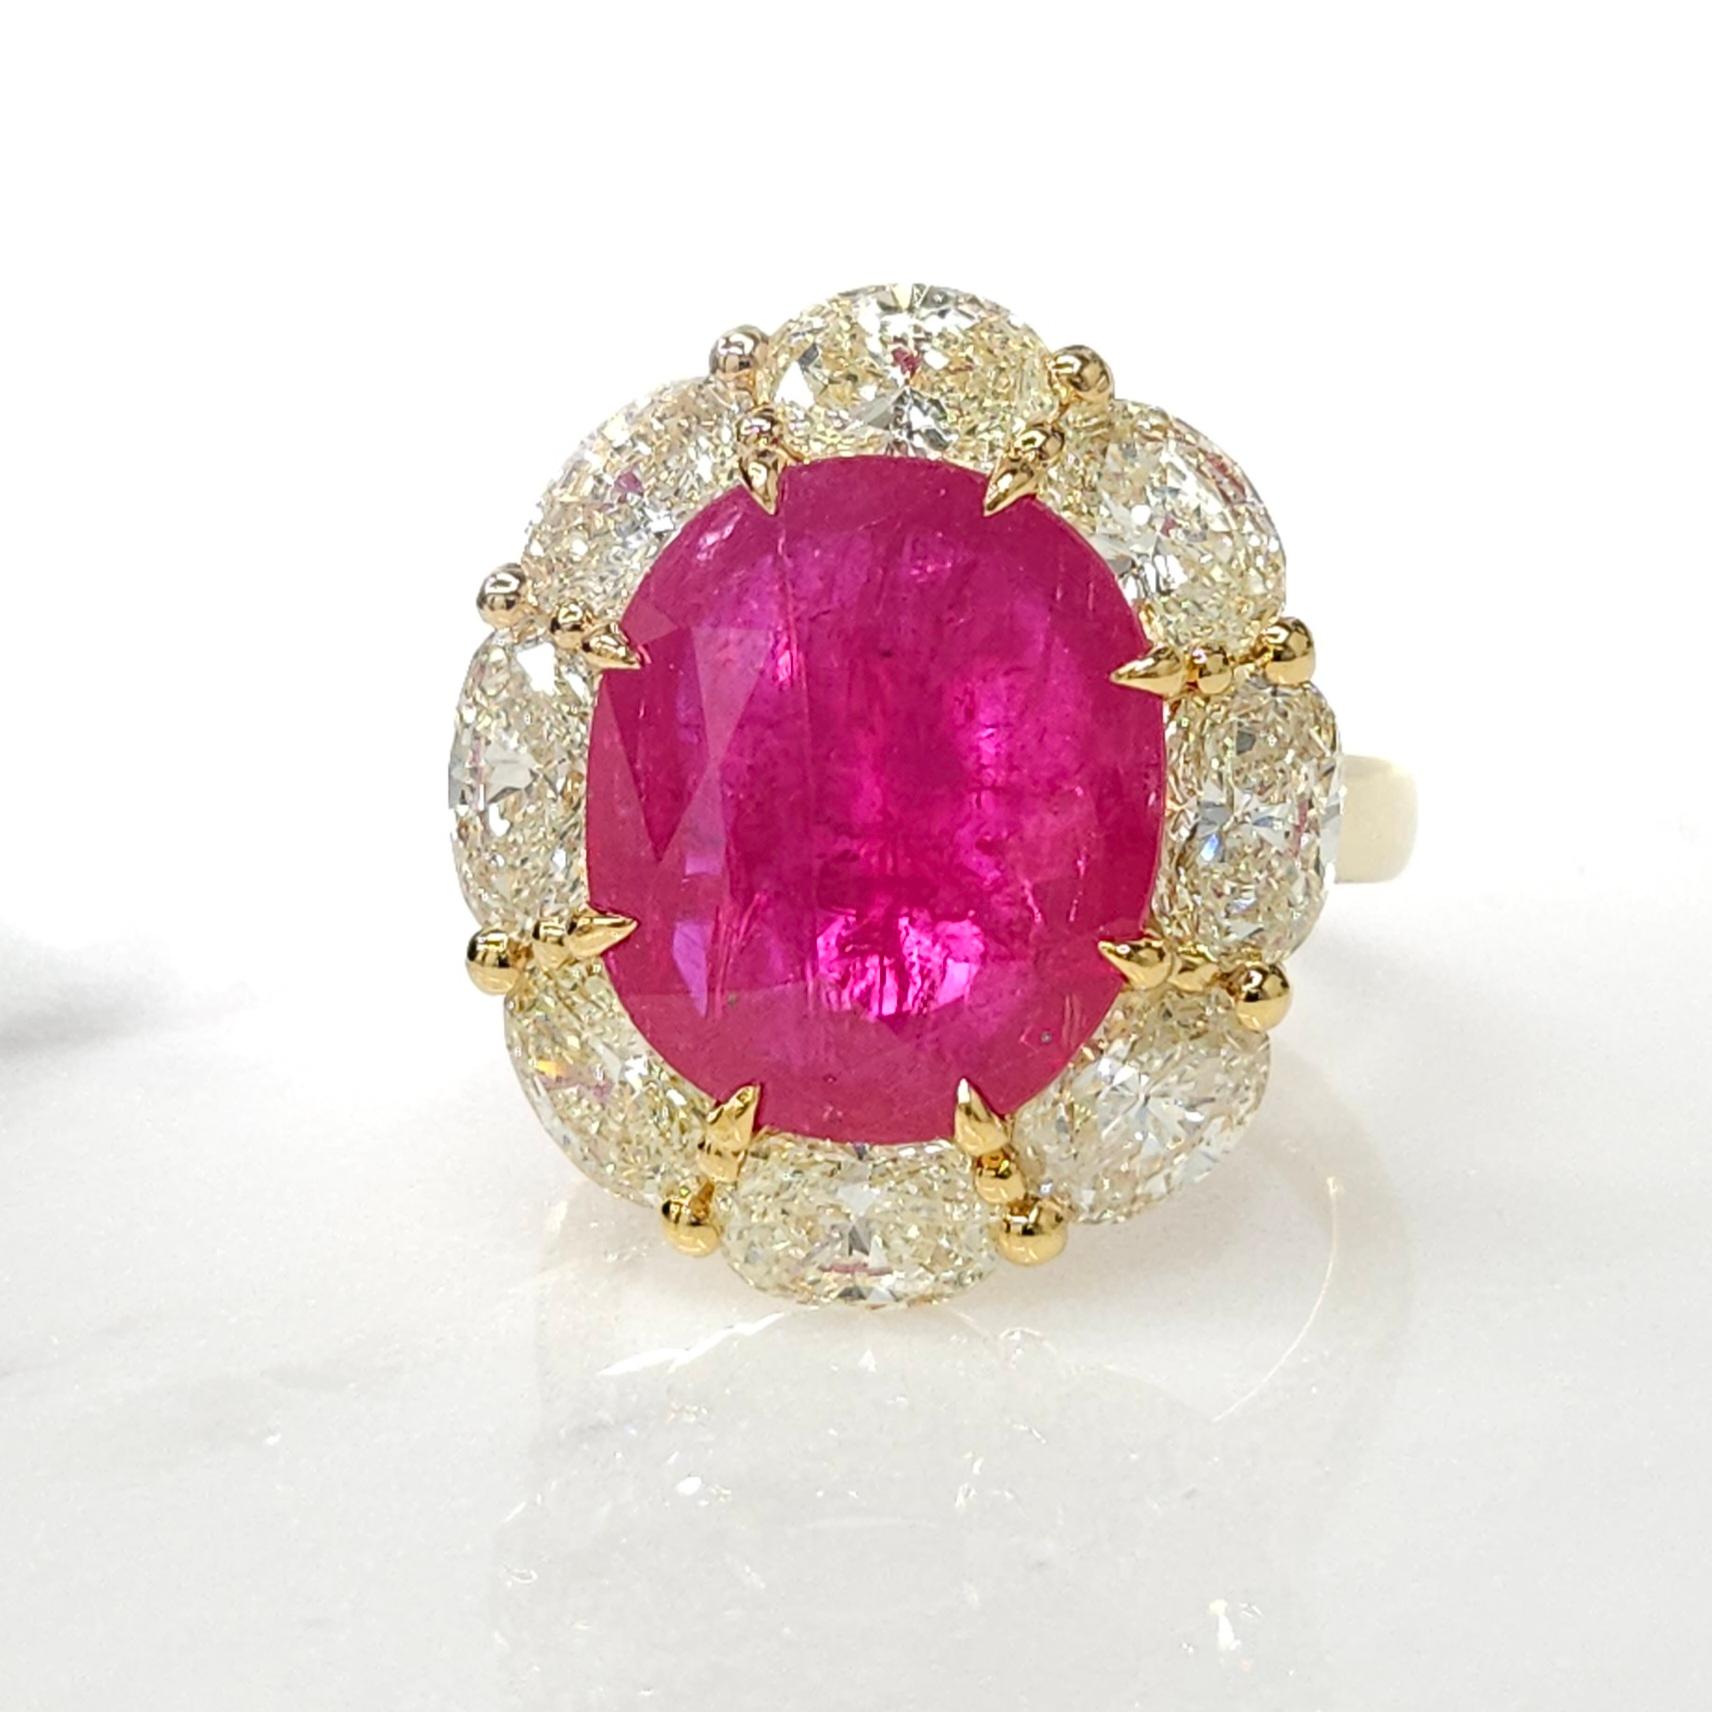 IGI Certified 6.53 Carat Ruby & 3.71 Carat Oval Diamond Ring in 18K Yellow Gold For Sale 9